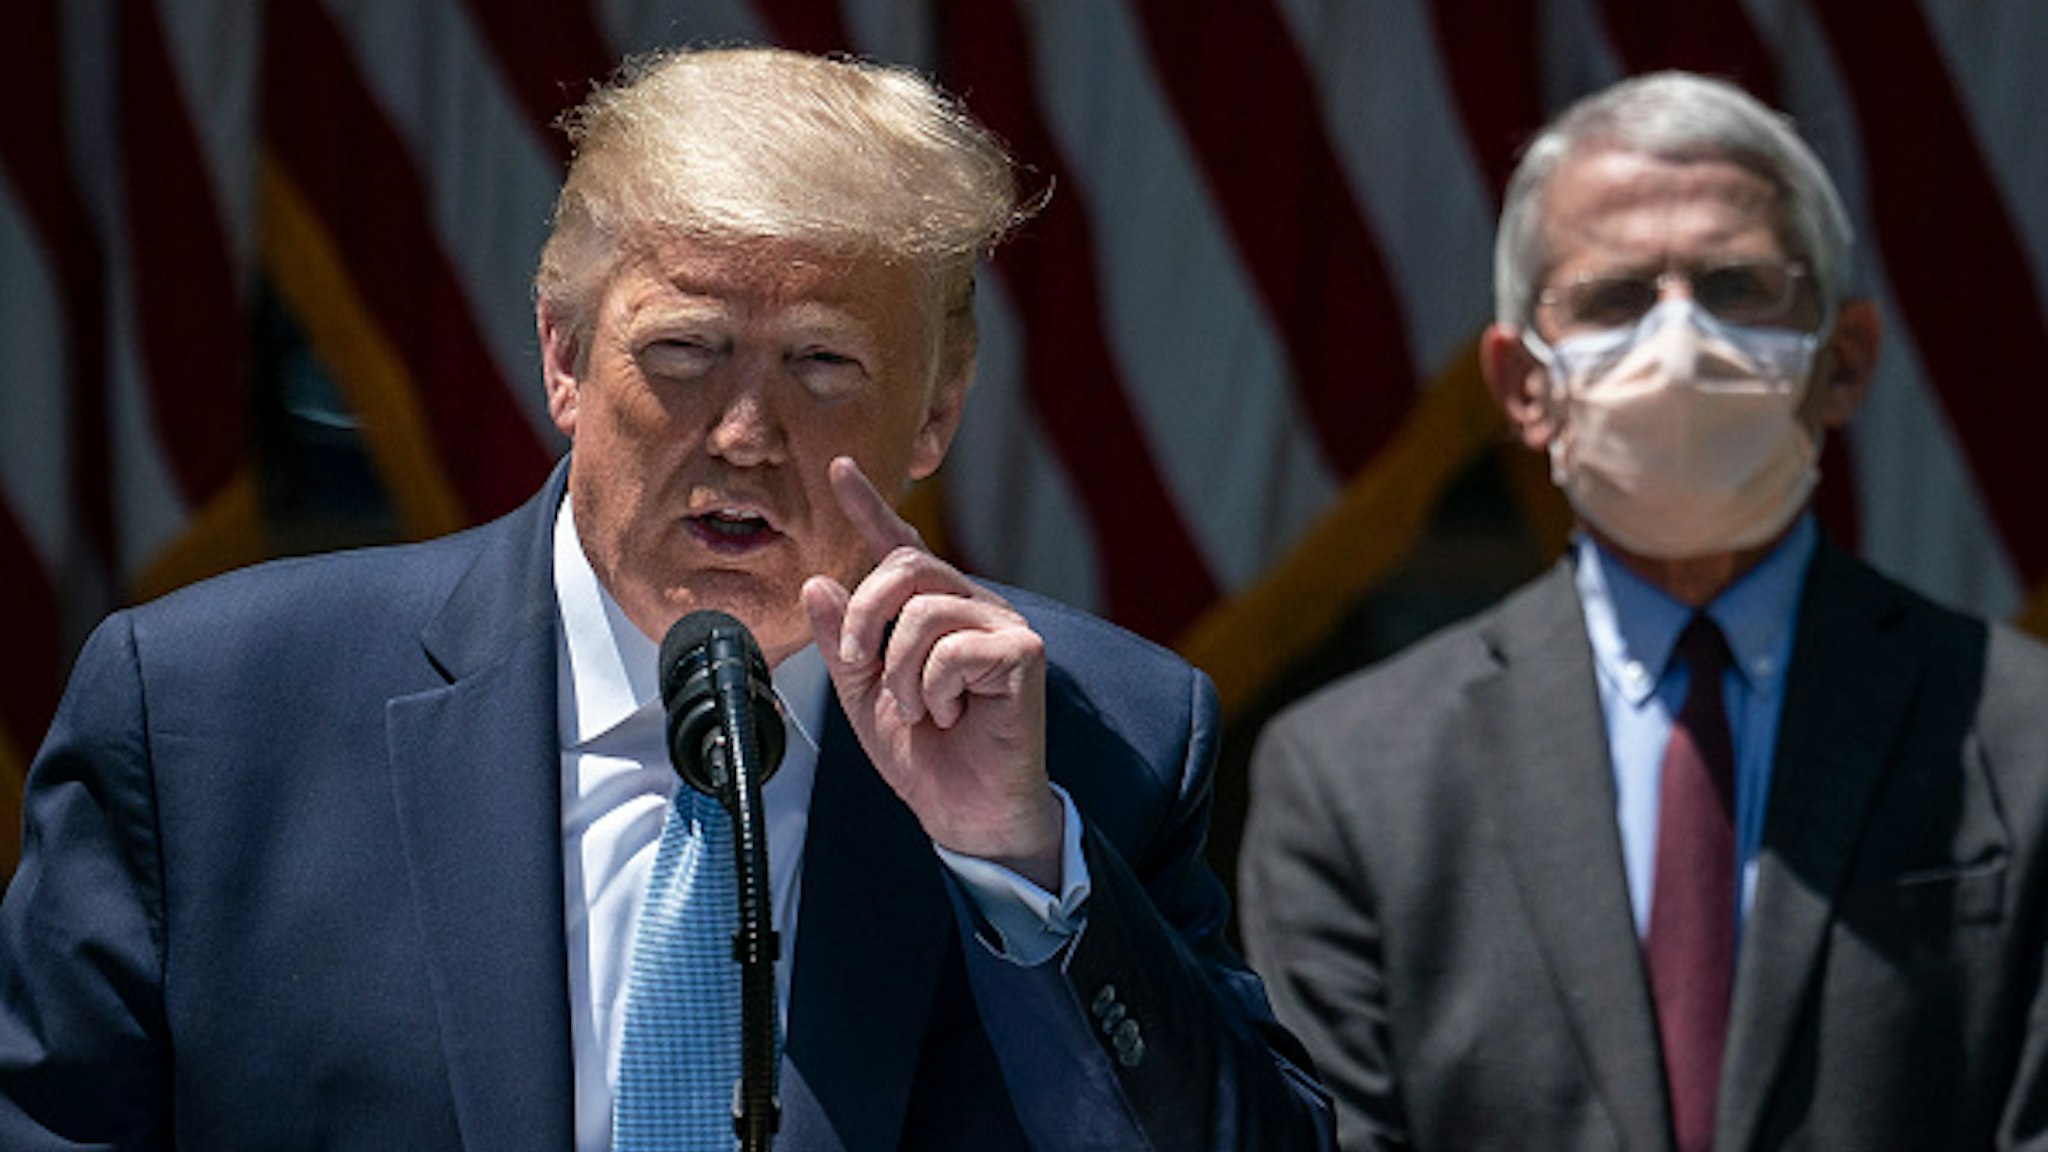 WASHINGTON, DC - MAY 15: Dr. Anthony Fauci (R), director of the National Institute of Allergy and Infectious Diseases, looks on as U.S. President Donald Trump delivers remarks about coronavirus vaccine development in the Rose Garden of the White House on May 15, 2020 in Washington, DC. Dubbed "Operation Warp Speed," the Trump administration is announcing plans for an all-out effort to produce and distribute a coronavirus vaccine by the end of 2020.